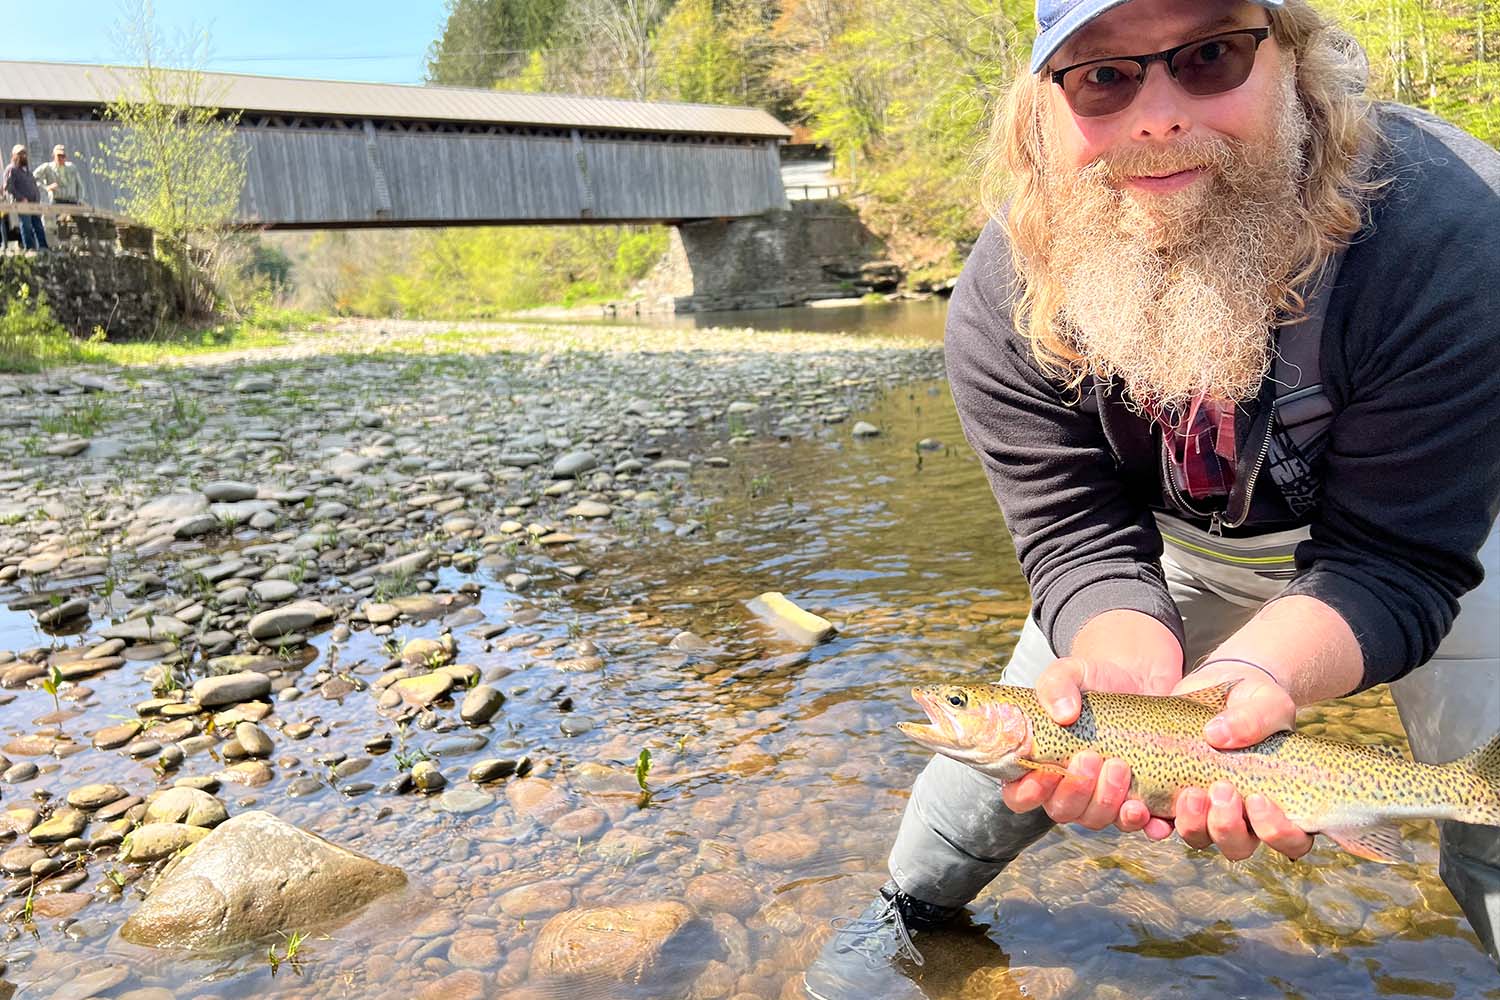 Chasing Trout in the Catskill Mountains - InsideHook